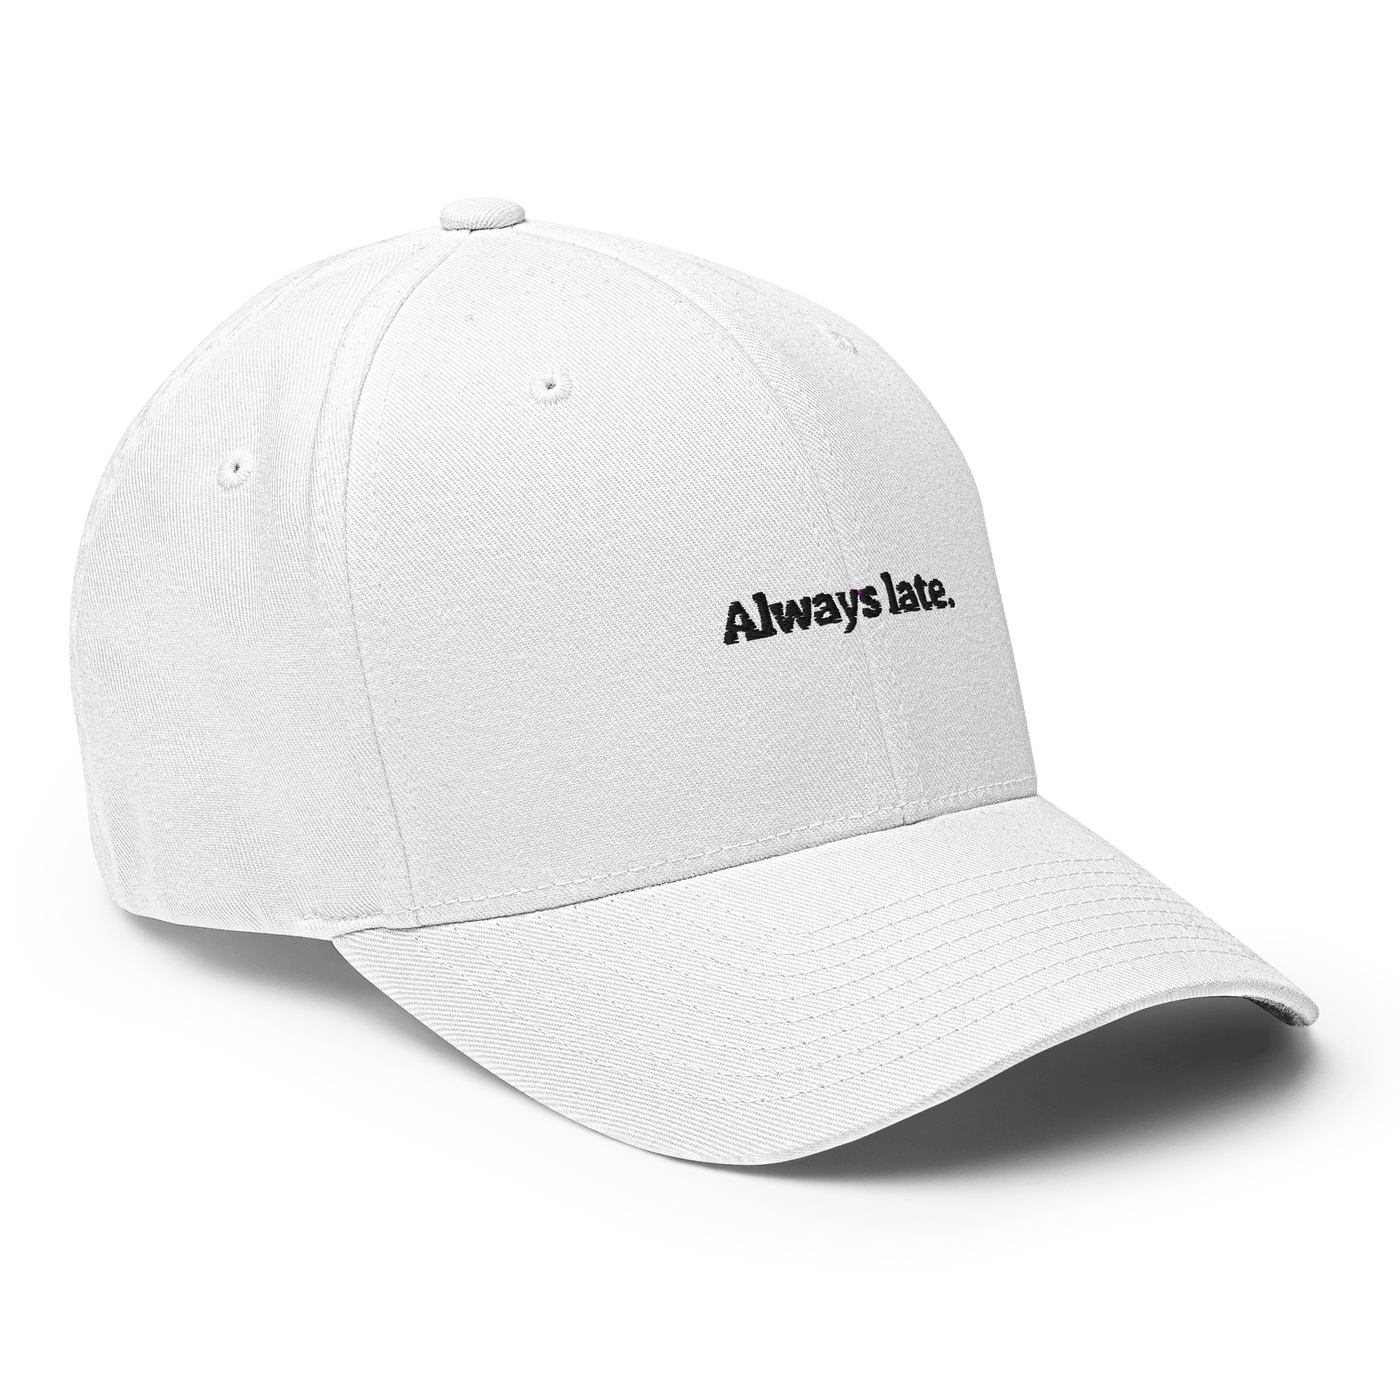 Always Late Flexfit Cap - White - S/M - Just Another Cap Store